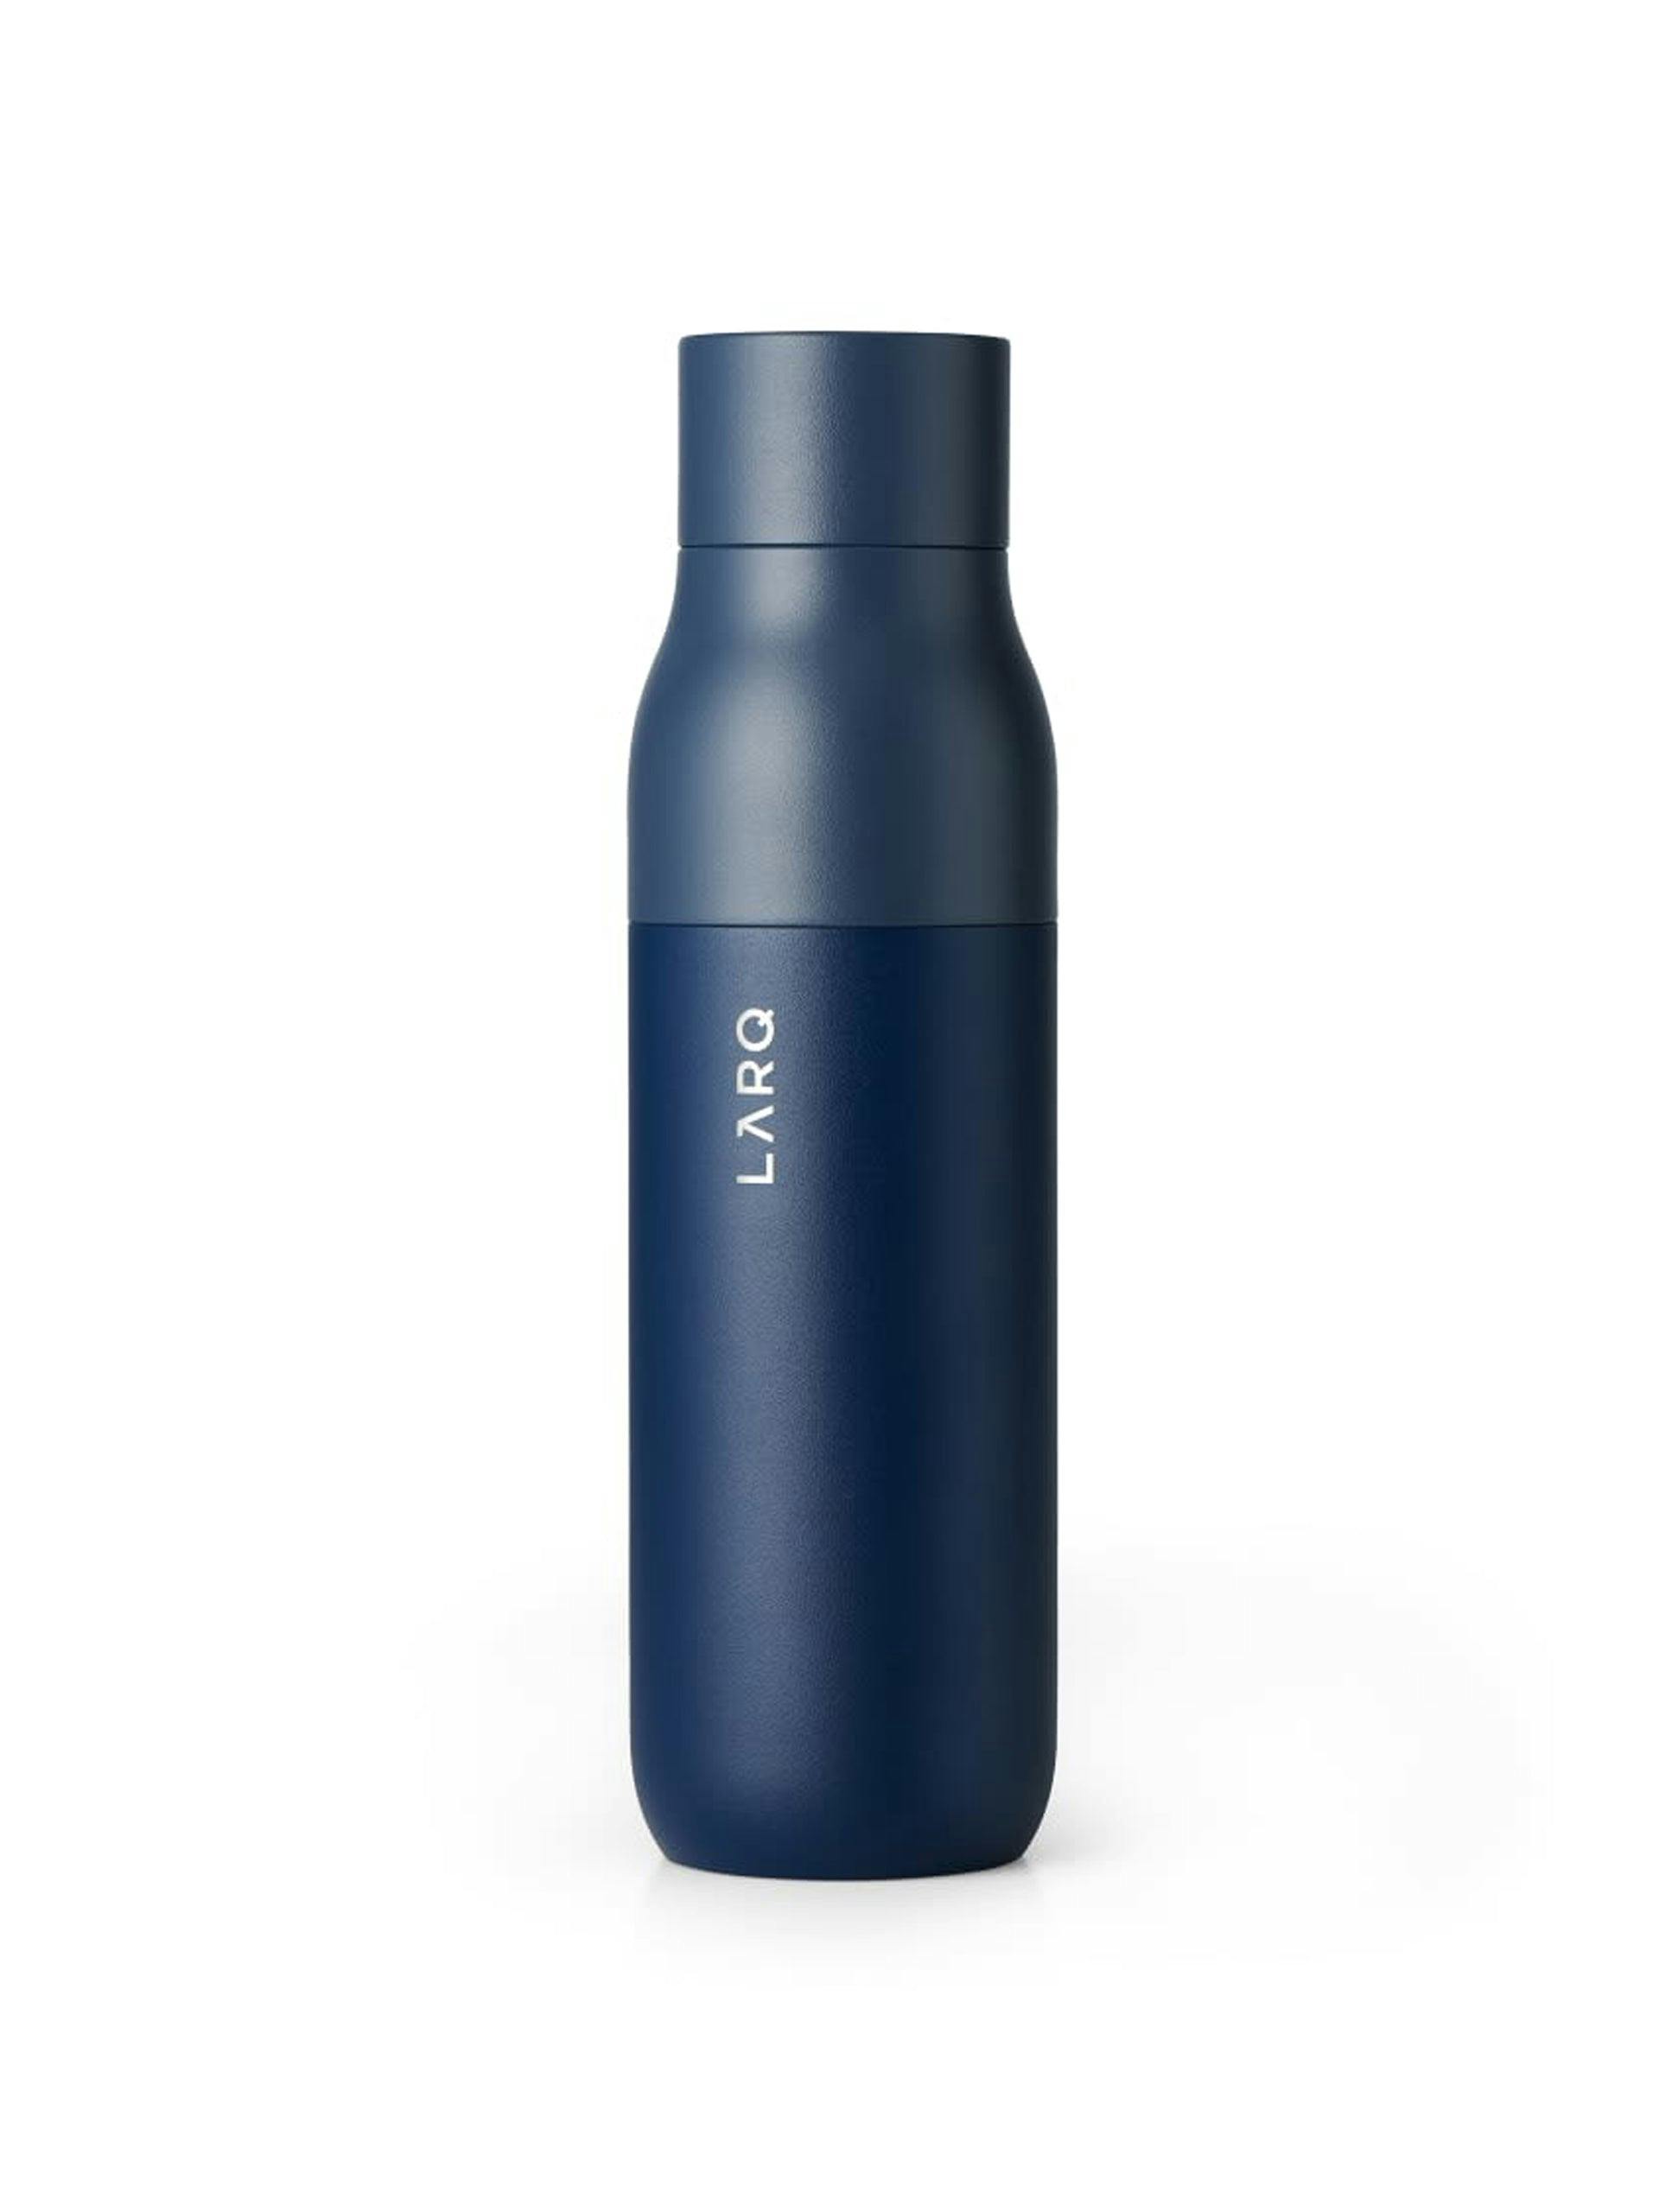 Self-cleaning water bottle